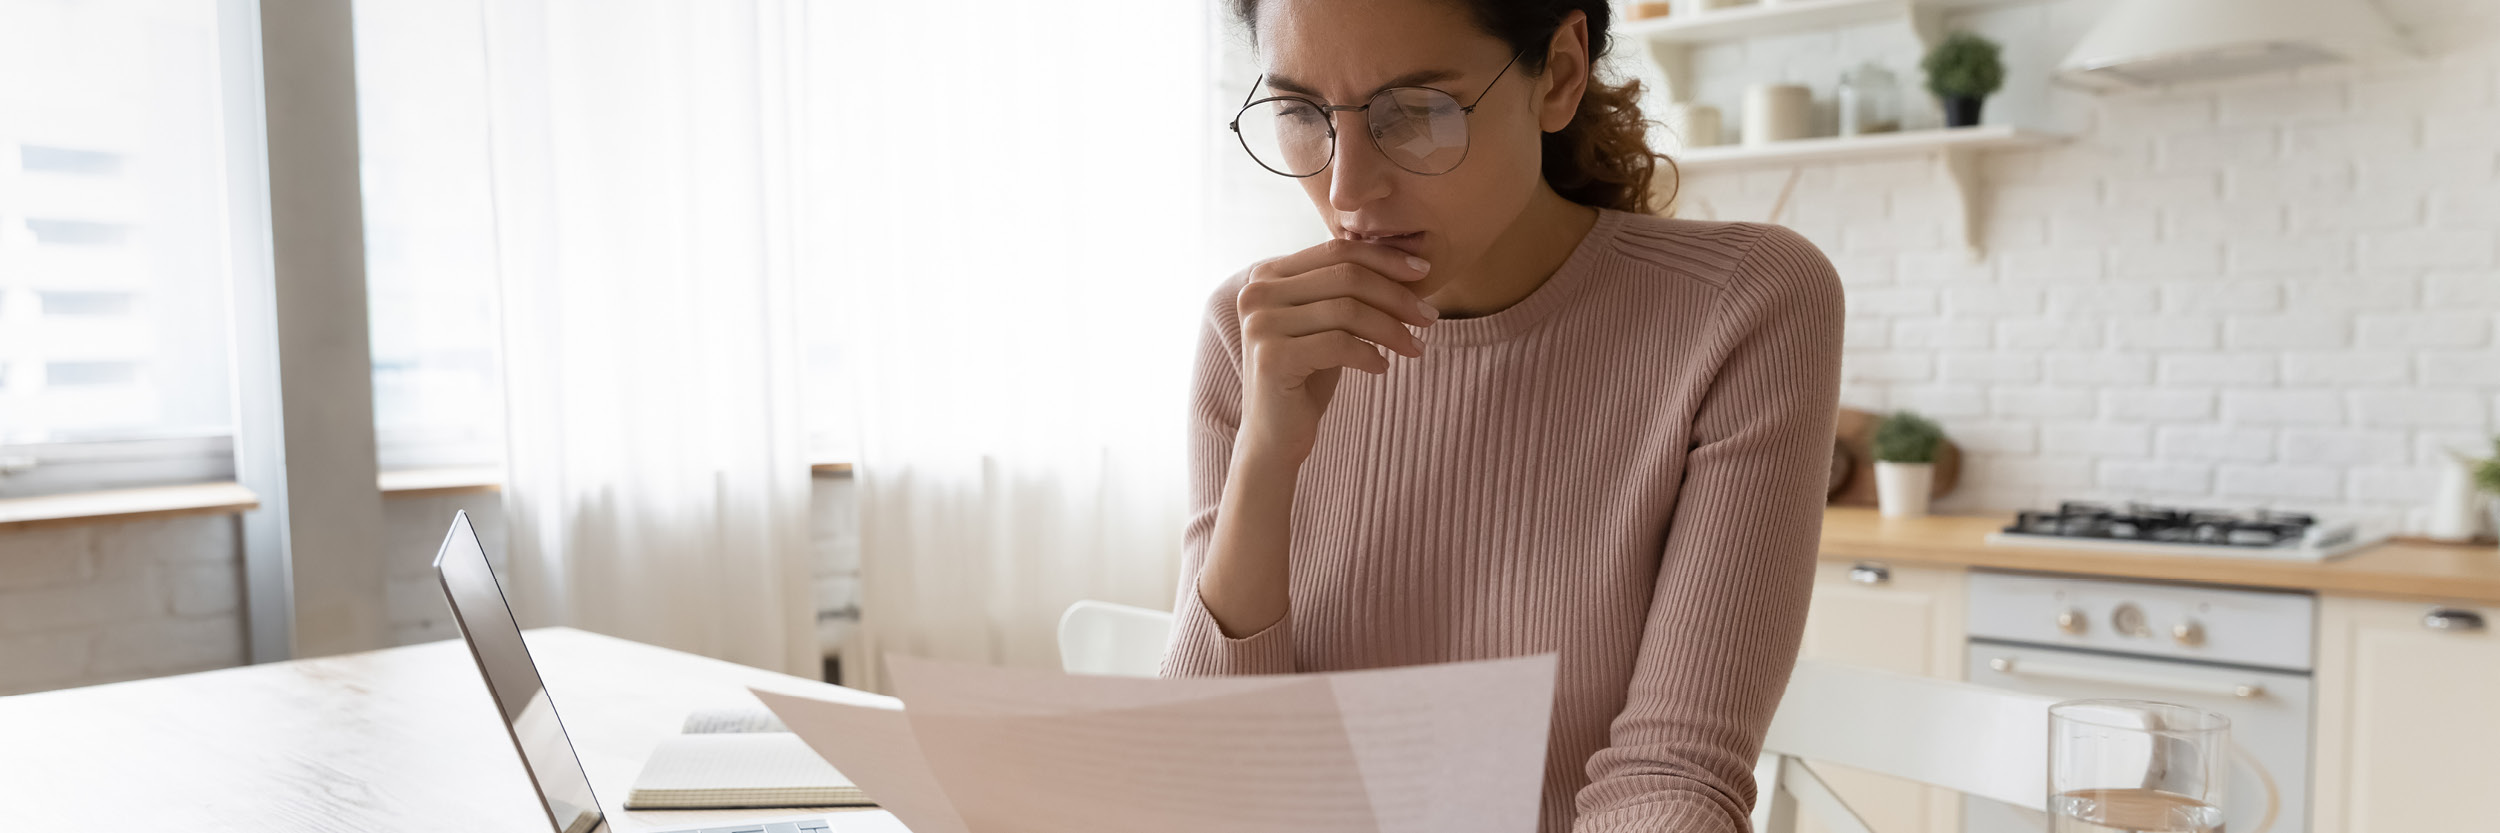 A woman wearing glasses sits at a table looking at some paperwork.